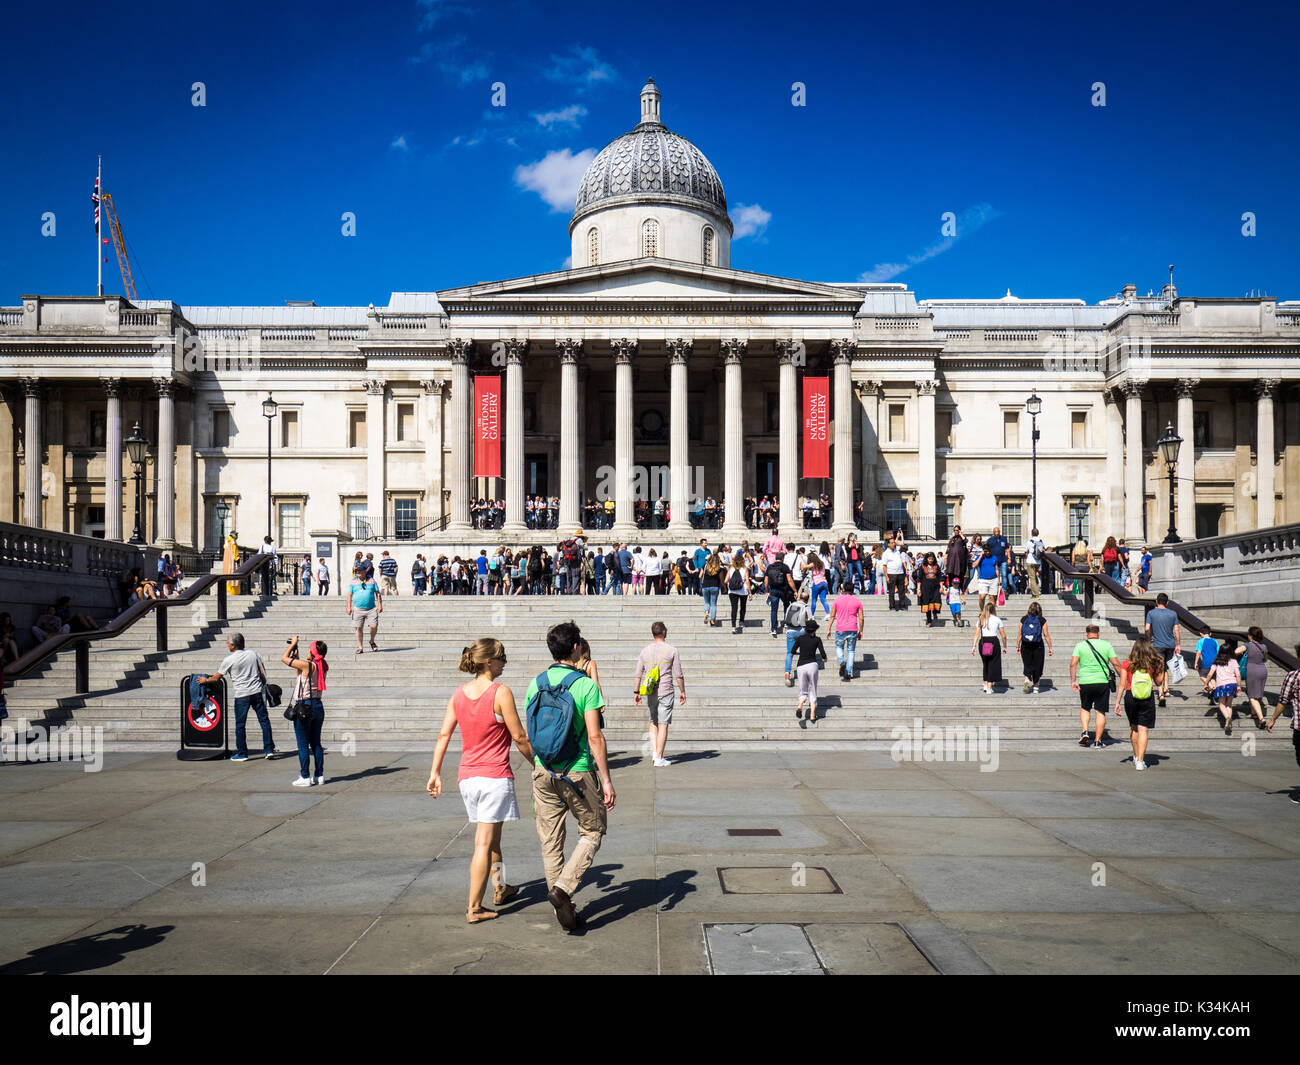 National Gallery London - Crowds outside the main entrance to the National Gallery in Trafalgar Square, central London, UK Stock Photo